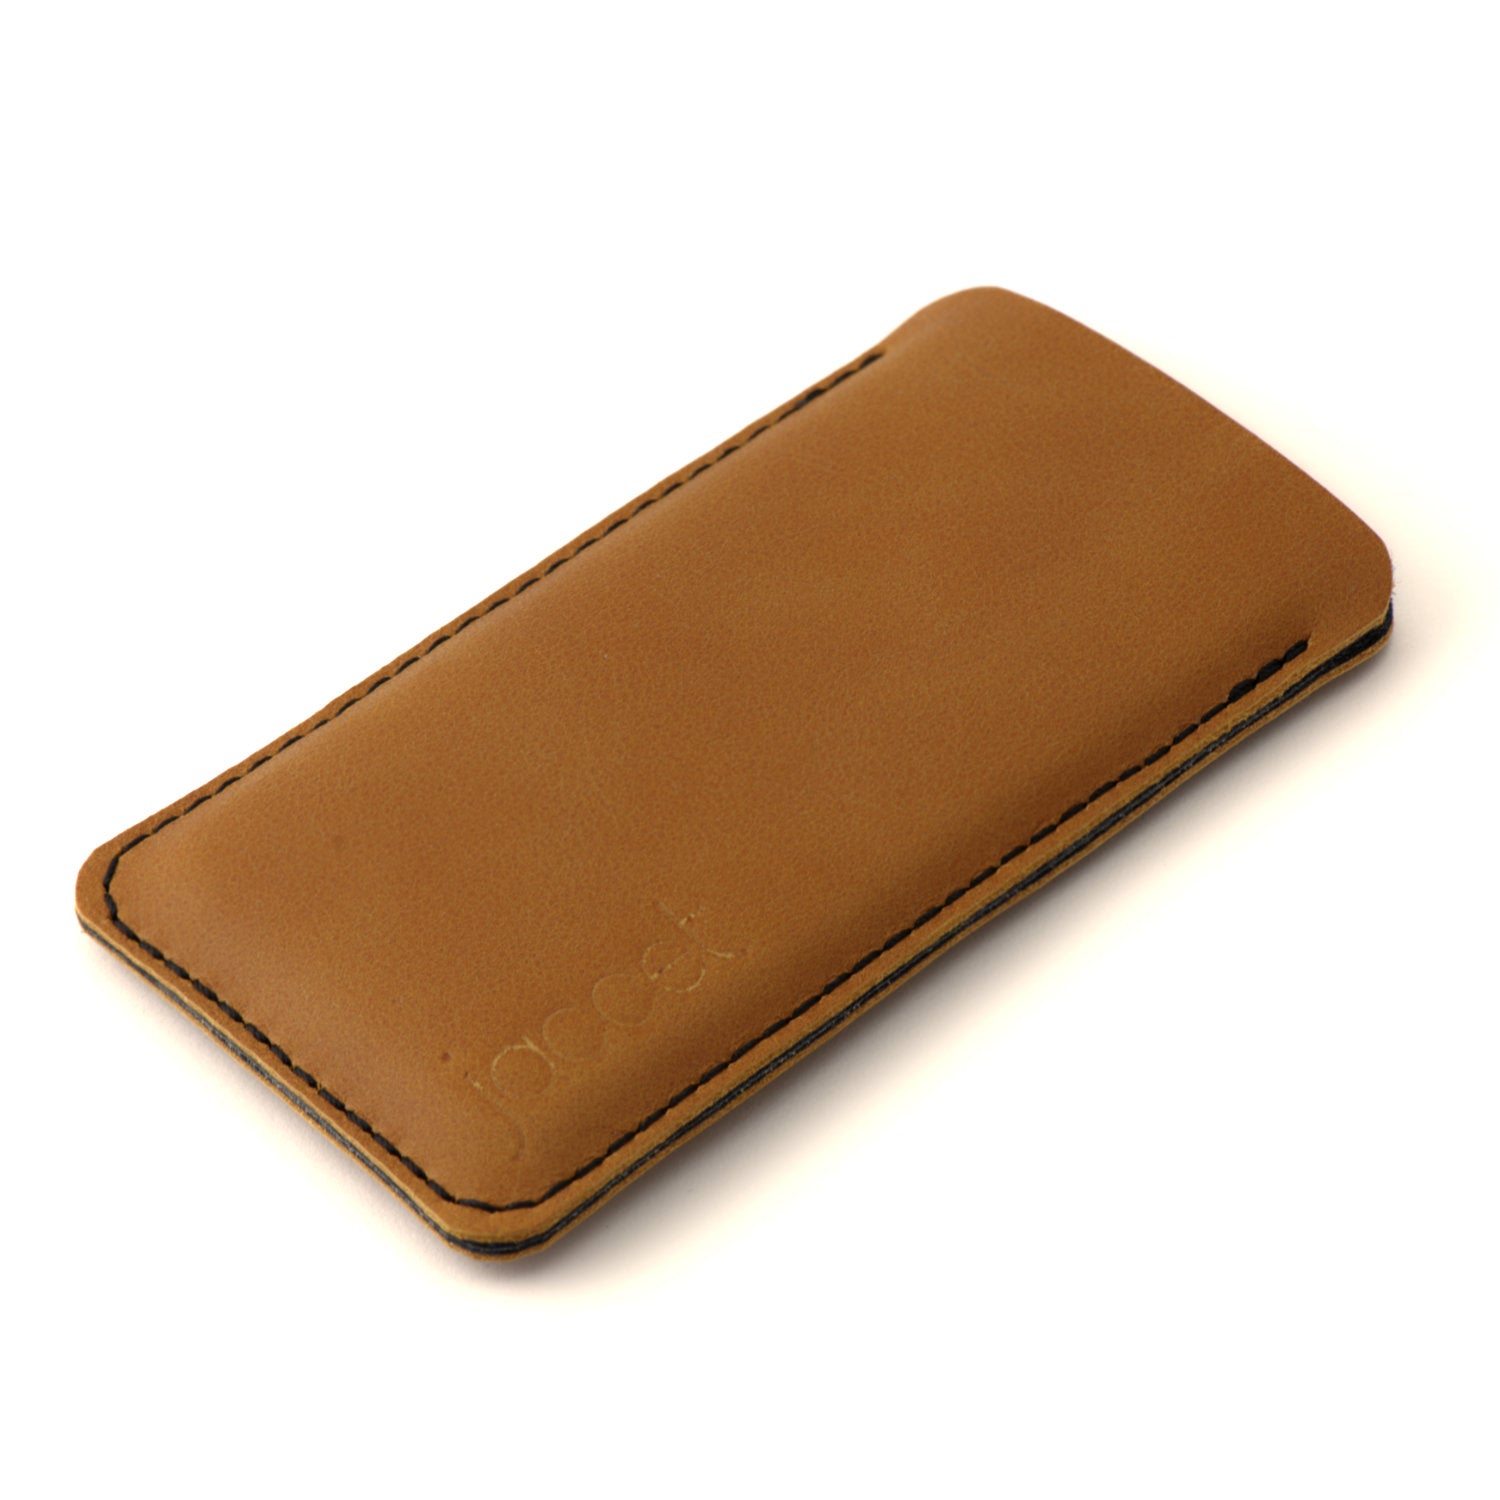 JACCET leather iPhone sleeve - Cognac color leather with black wool felt - 100% Handmade